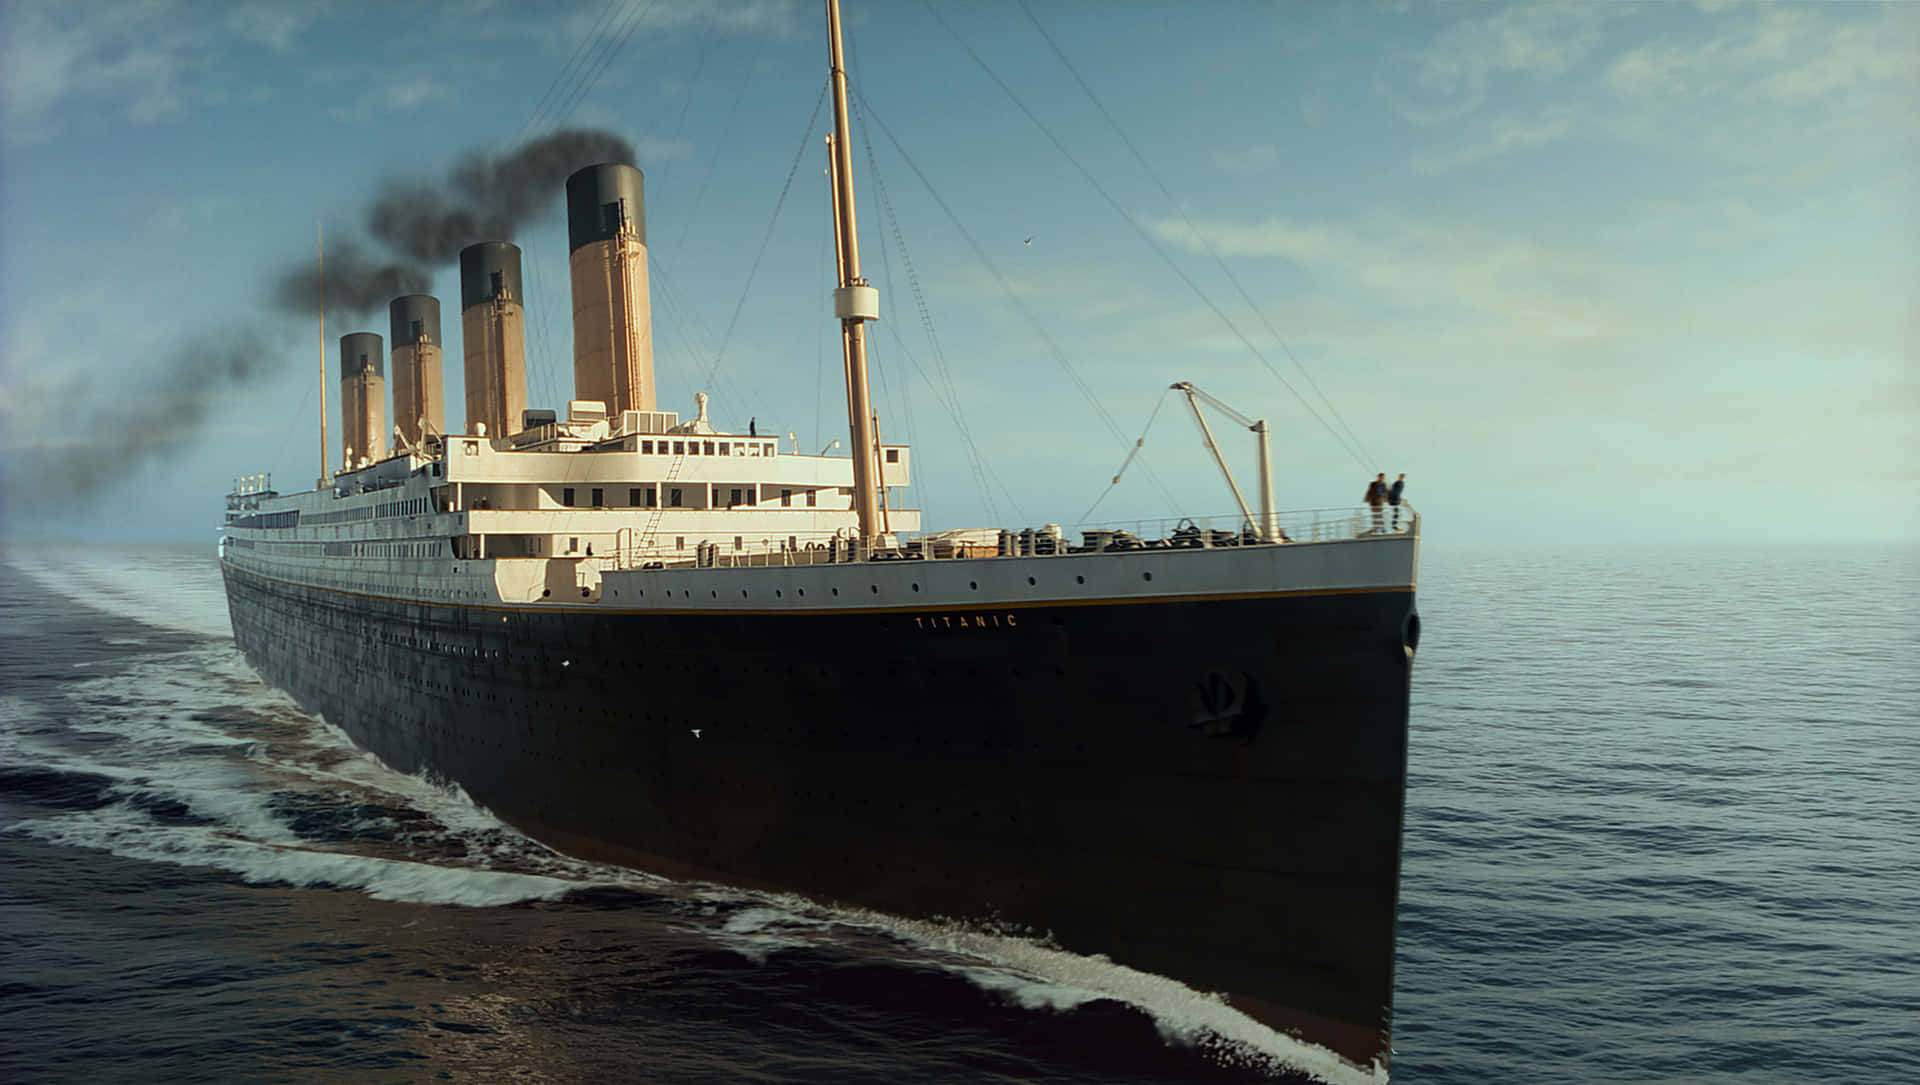 The Titanic vessel, standing proud before its maiden voyage.